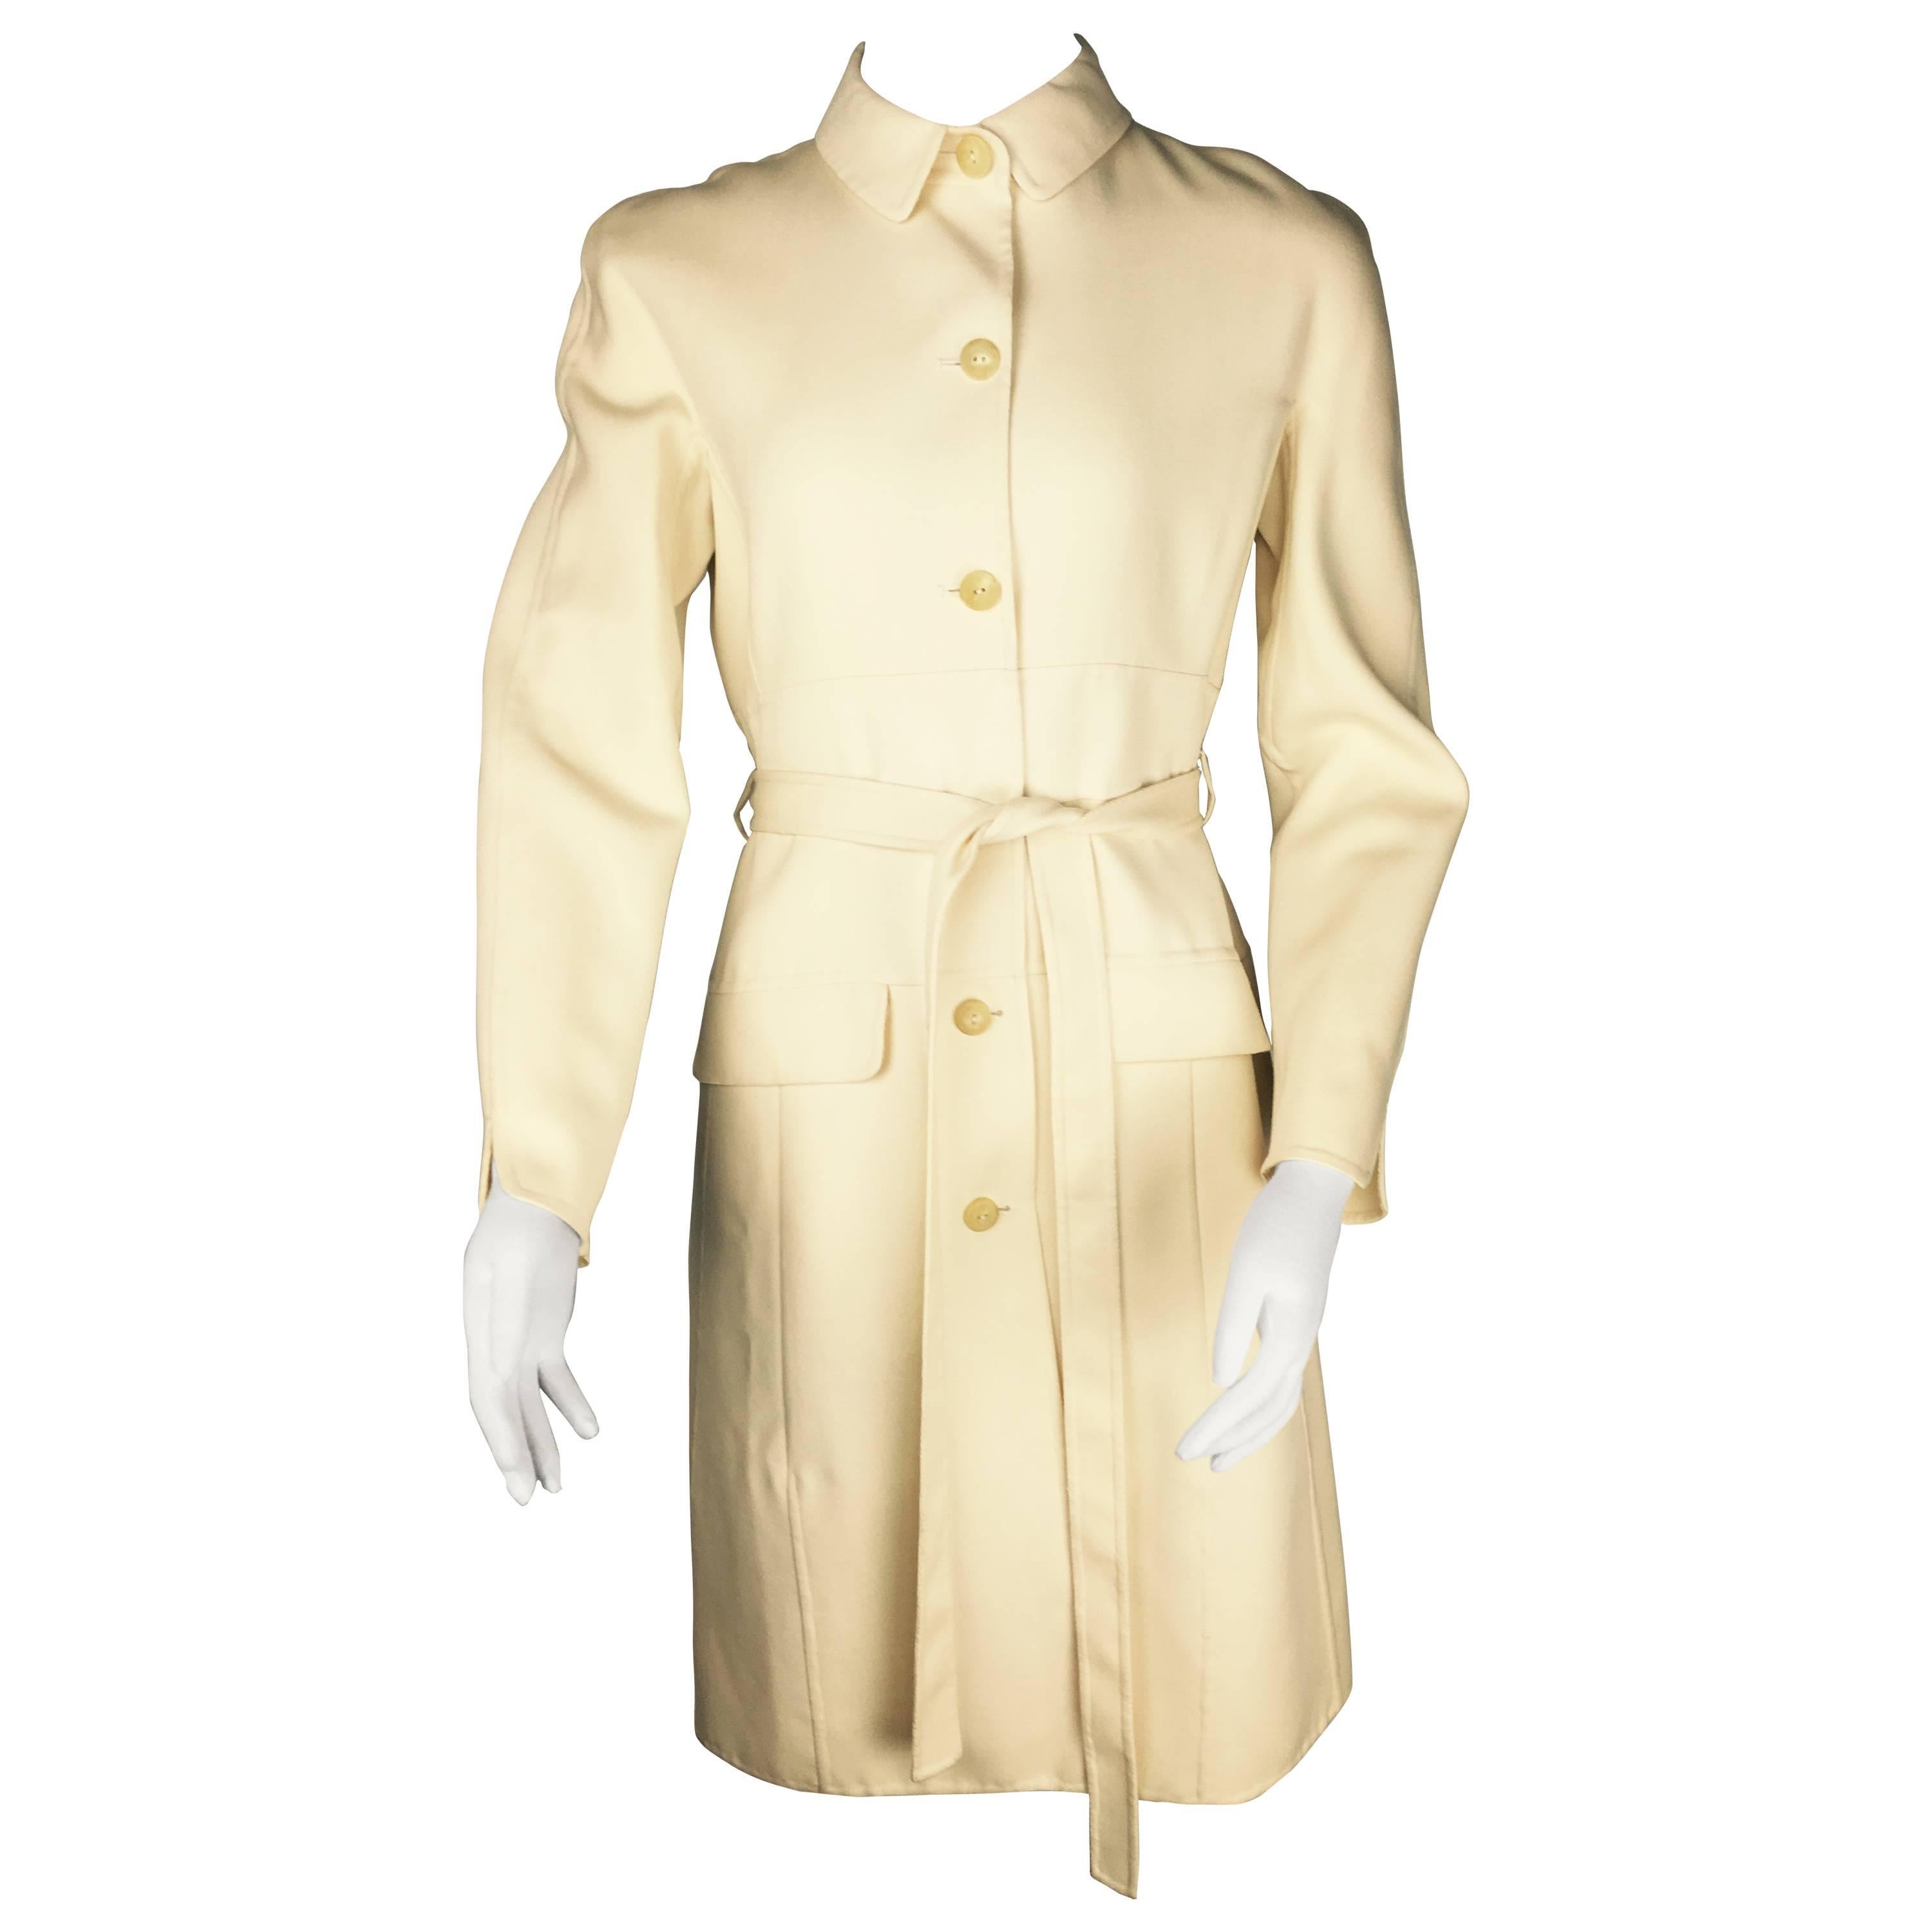 Chado Ralph Rucci Belted Wool Vintage Coat. 